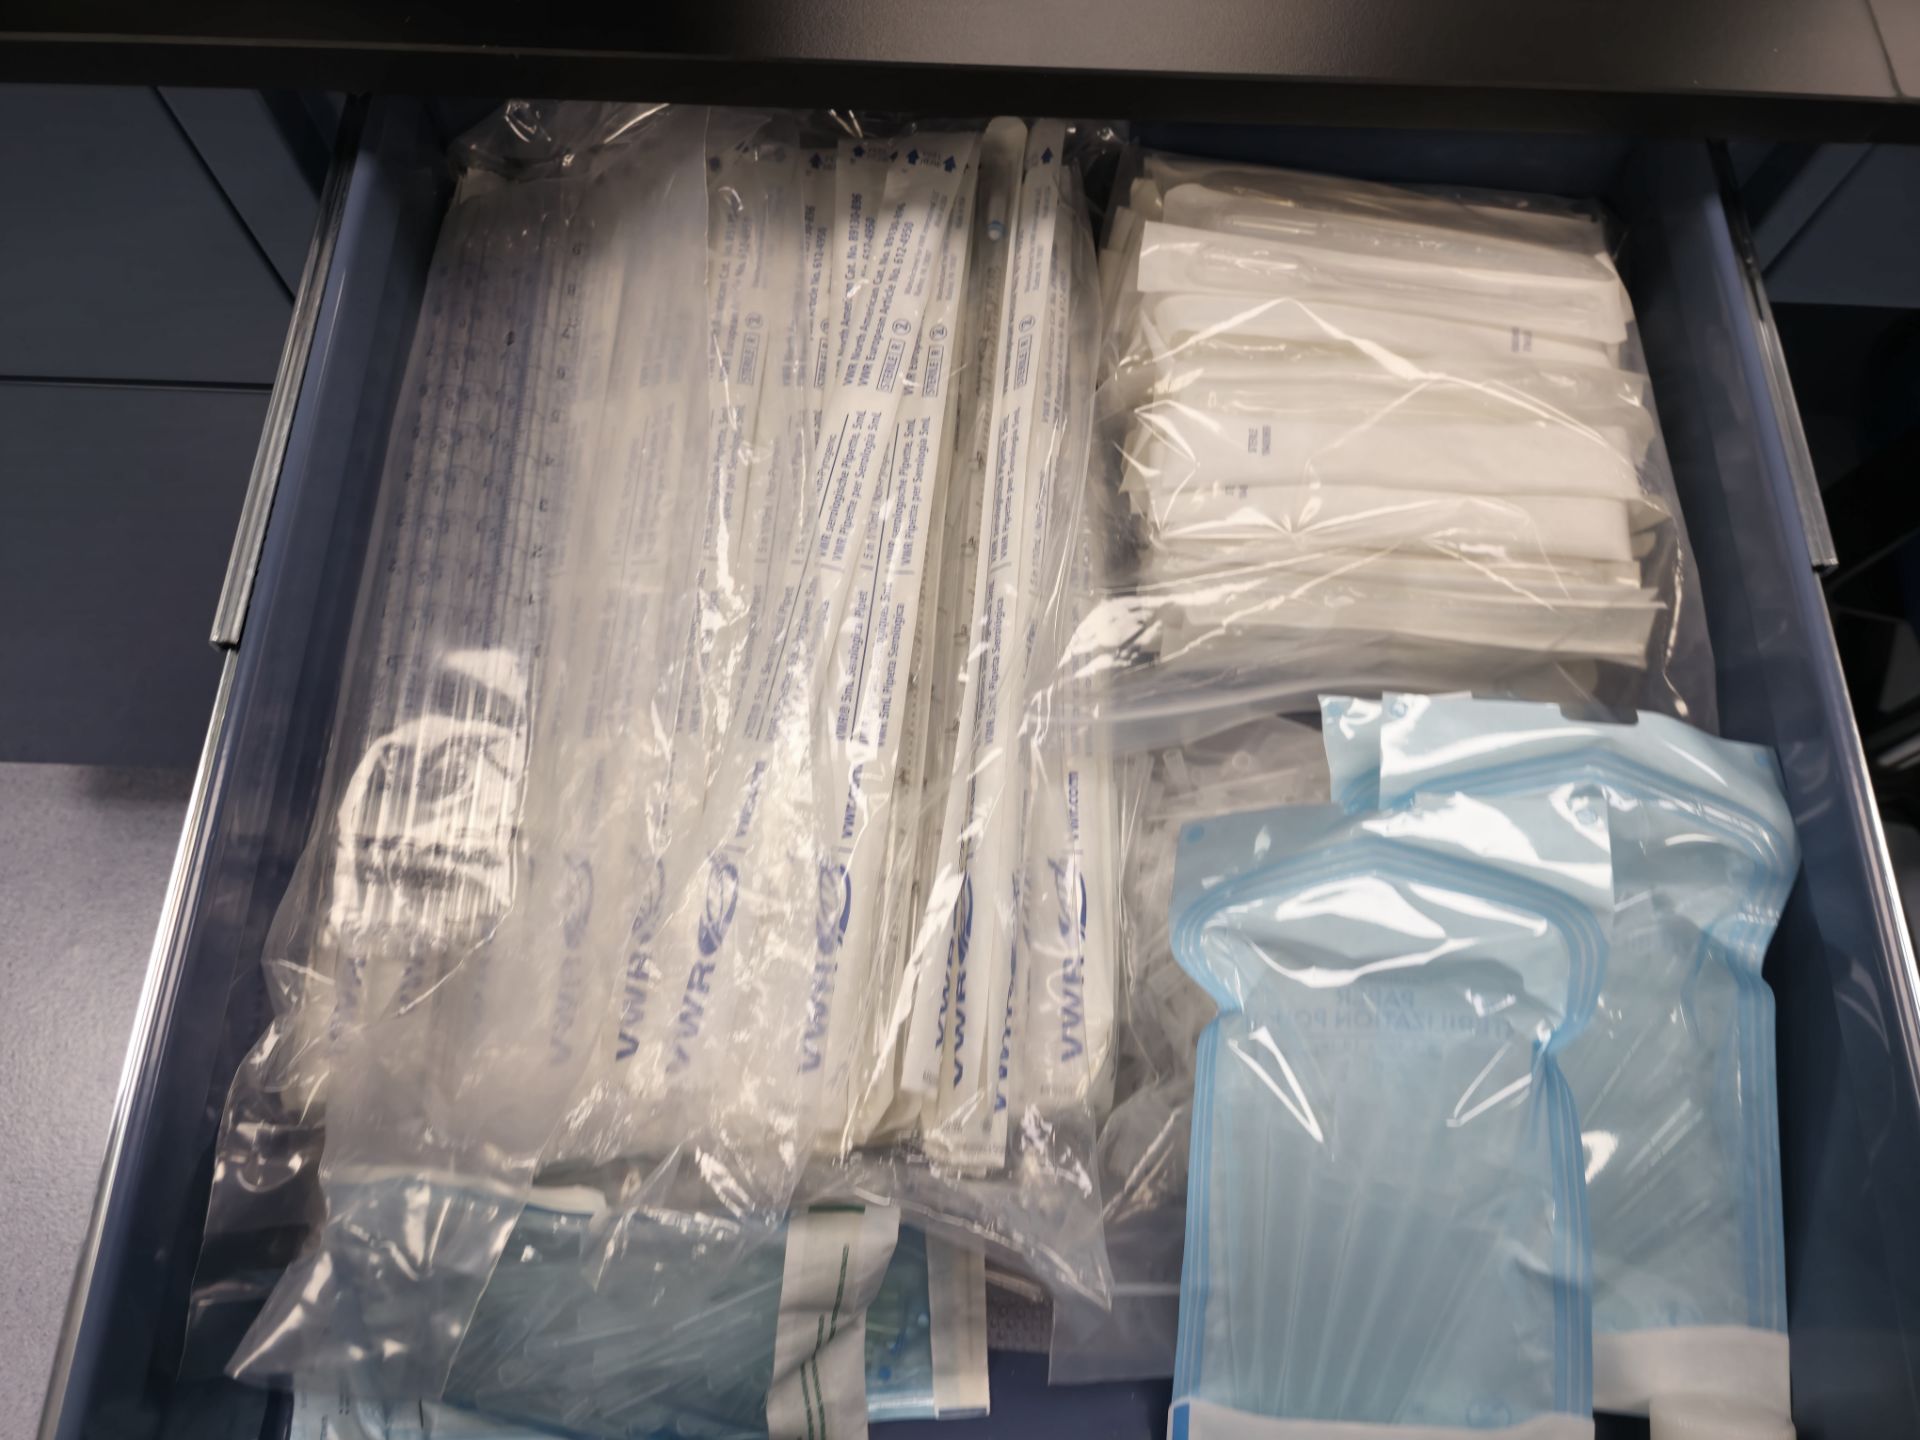 ALL CONTENTS IN ISLAND CABINETS PLATES, CONTAINERS, SYRINGES, TUBES, SALINE & MORE - Image 5 of 6